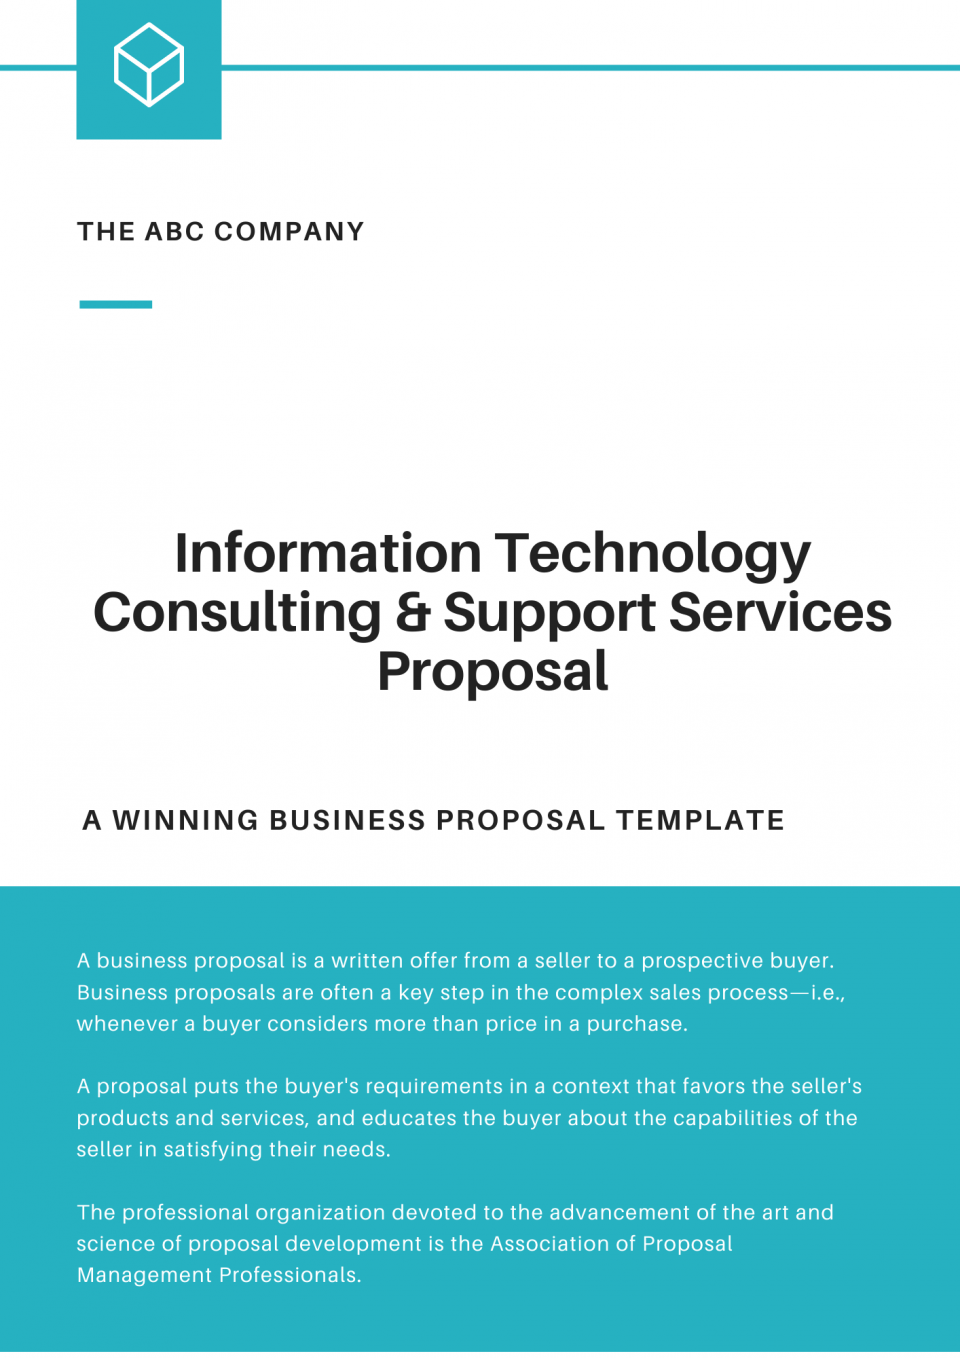 Information Technology Consulting & Support Services Proposal Template